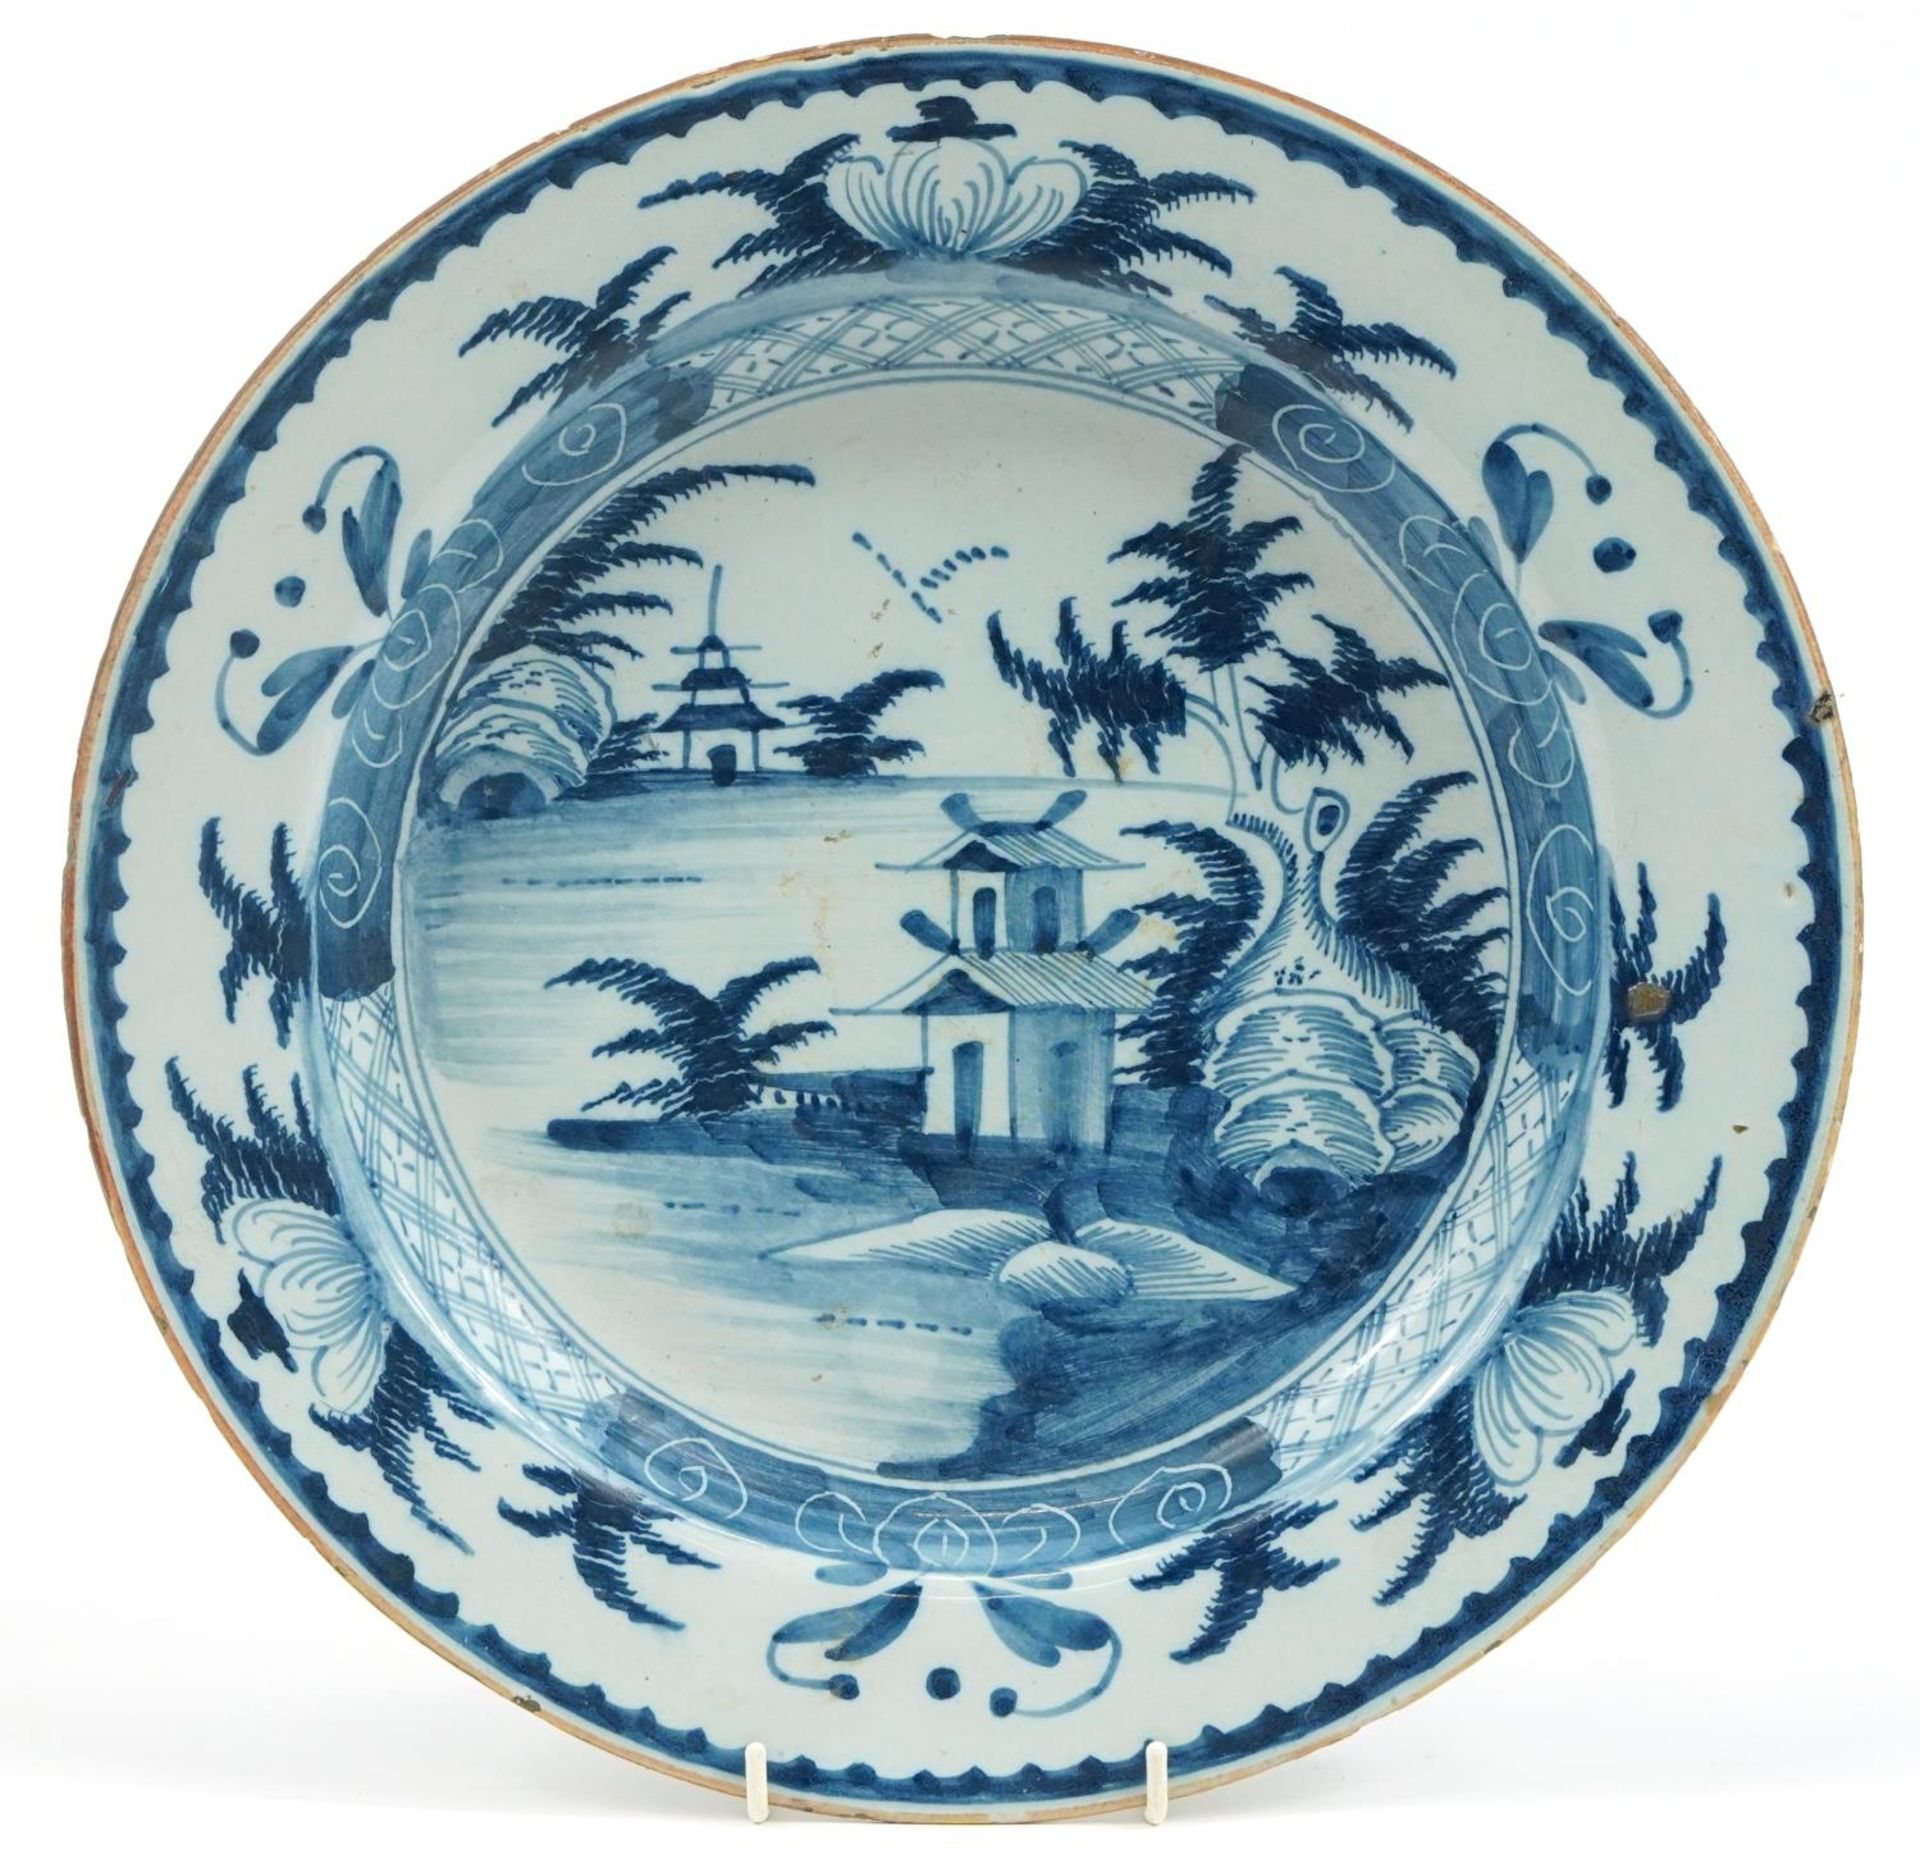 18th/19th century Delft blue and white tin glazed charger hand painted in the chinoiserie manner